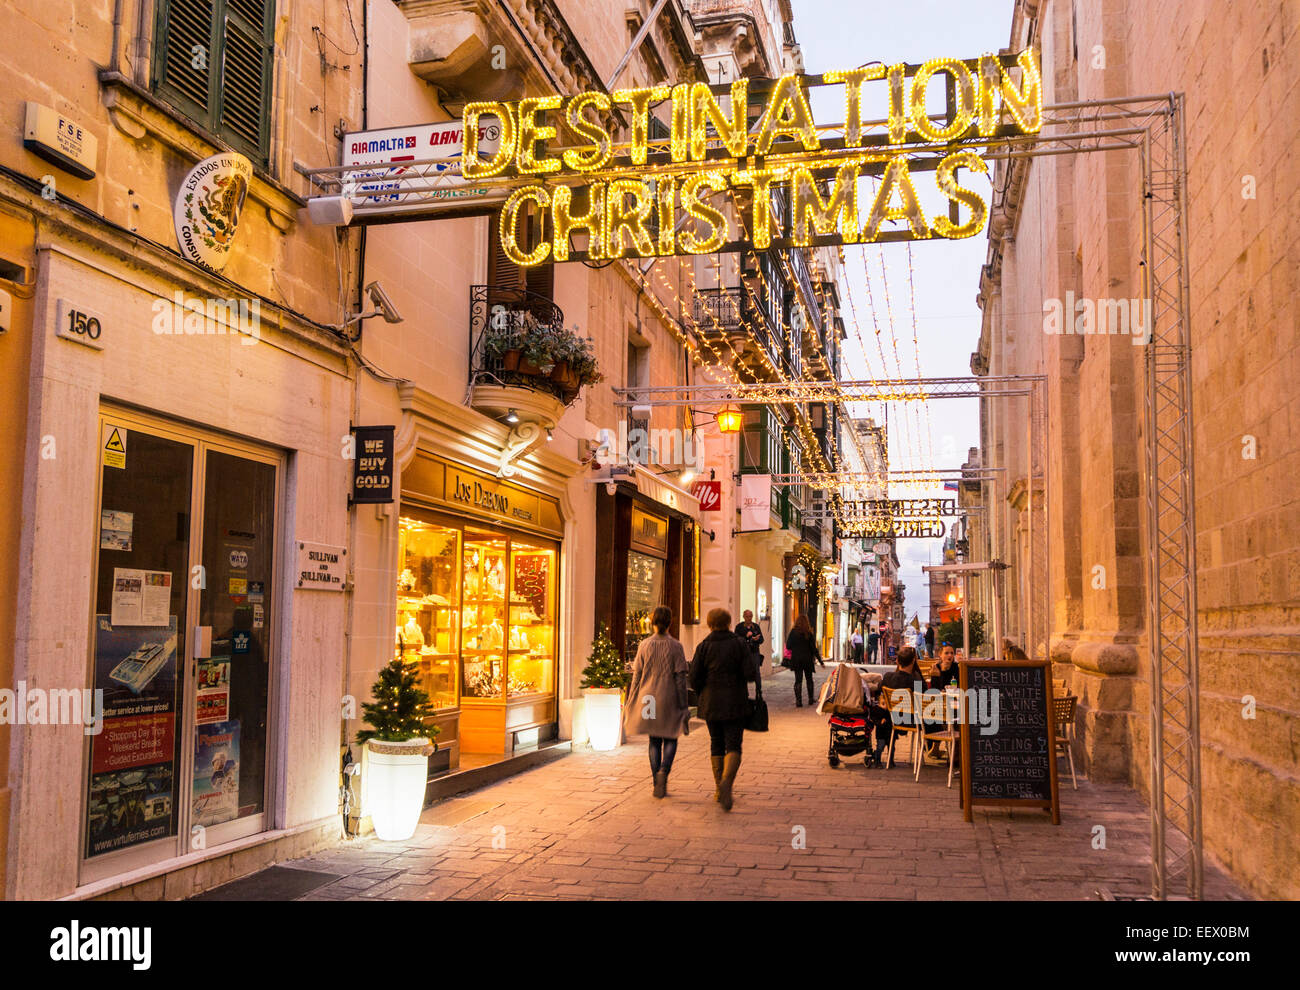 Destination Christmas sign and shoppers in old town Valletta Malta EU  Europe Stock Photo - Alamy